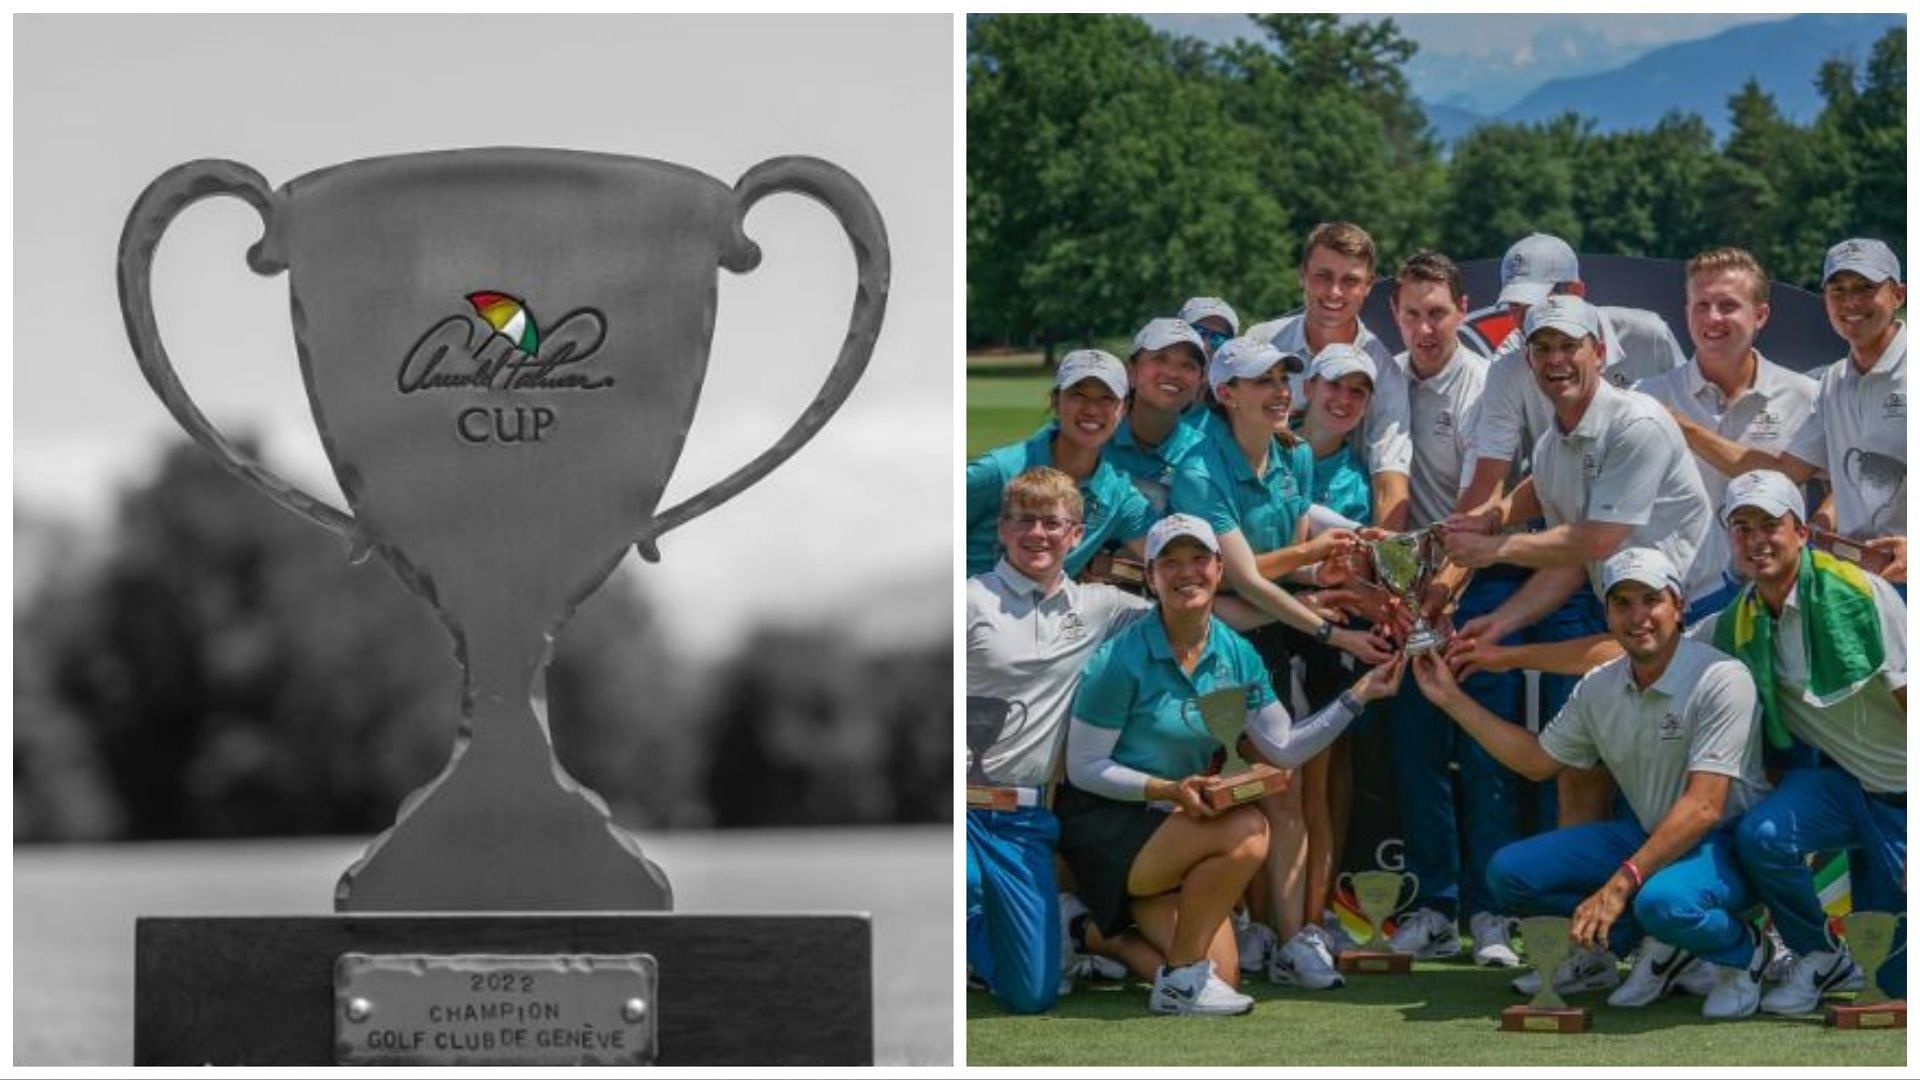 Arnold Palmer Cup trophy and 2022 Champions (via Instagram/@https://www.instagram.com/p/Cfwf83OuaO-/)